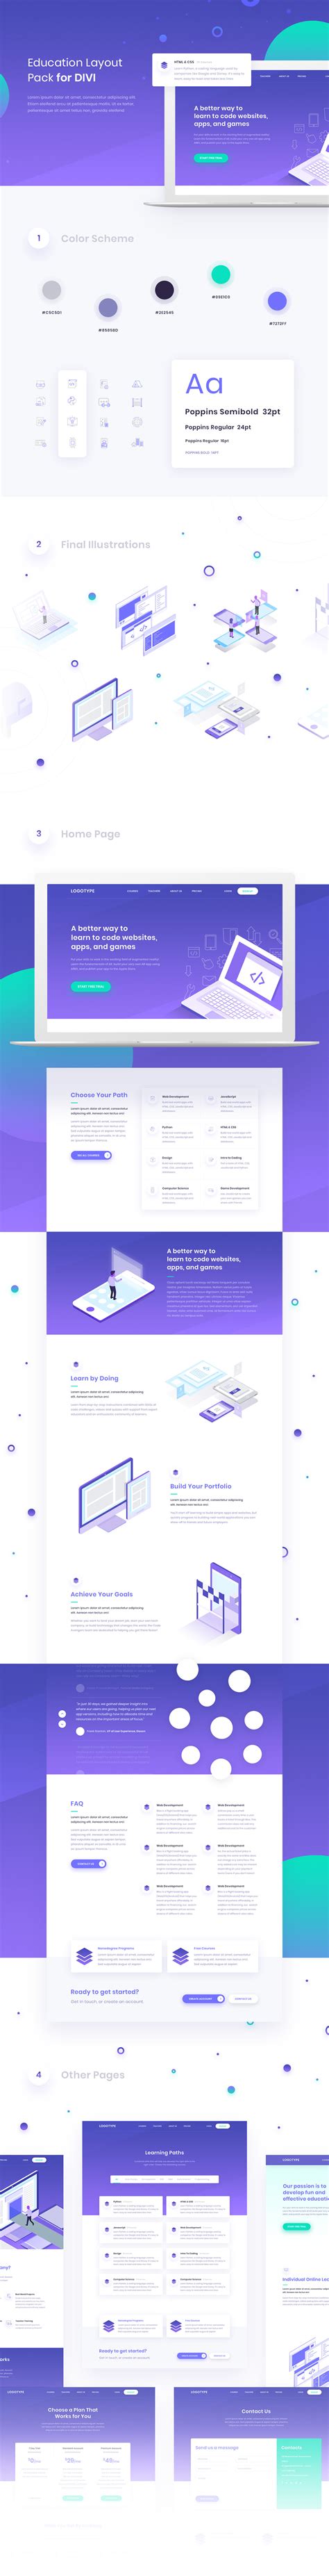 education layout pack  behance